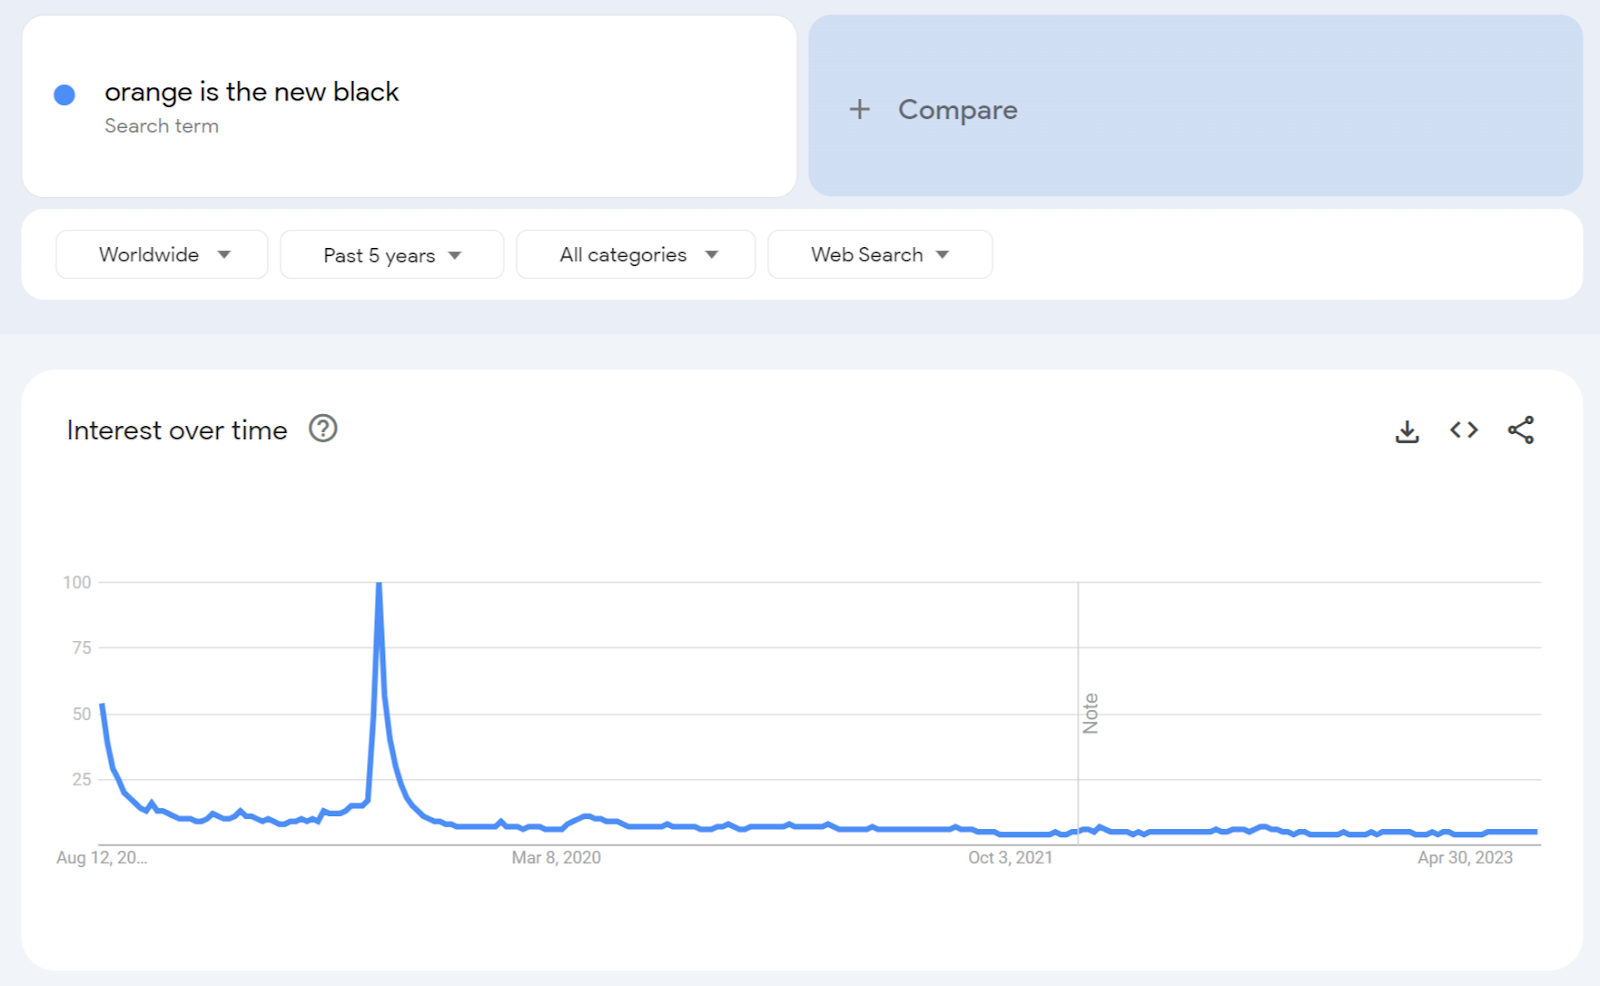 "Interest over time" graph for “Orange is the New Black” in Google Trends